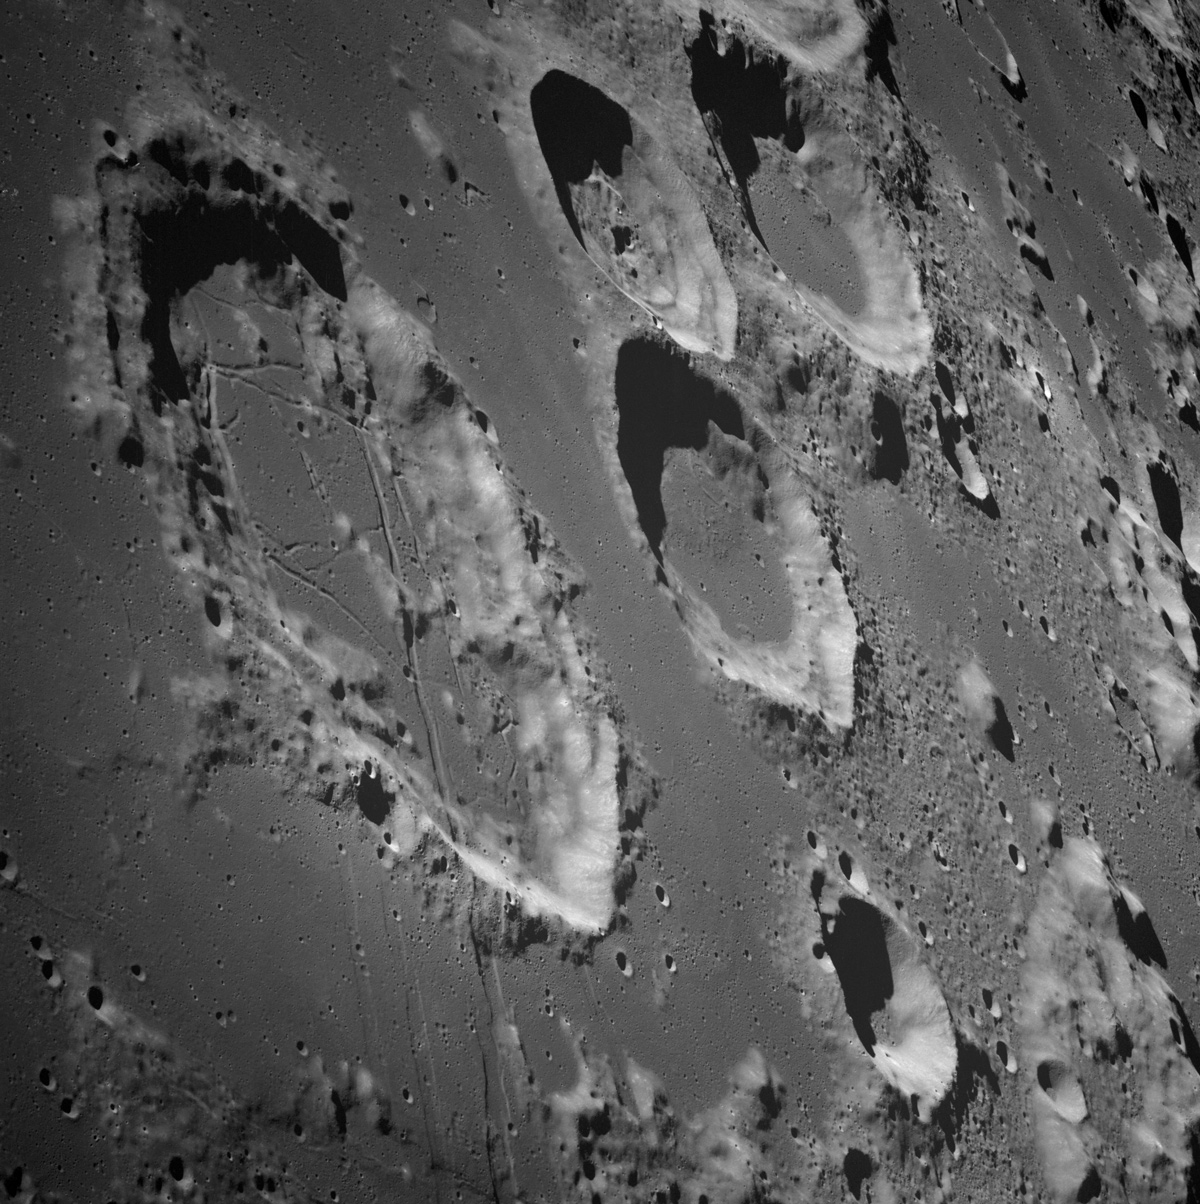 Craters dot the Moon's landscape. This photograph was taken from the Apollo 8 spacecraft with long-focal length lens, looking south at the large crater Goclenius, which is in foreground. Hold picture with Goclenius at bottom center. The three clustered craters are Magelhaens, Magelhaens A, and Colombo A. The crater at upper right is Gutenberg D. The crater Goclenius is located at 10 degrees south latitude, 45 degrees east longitude, and it is approximately 40 statute miles in diameter. Image: NASA/JSC